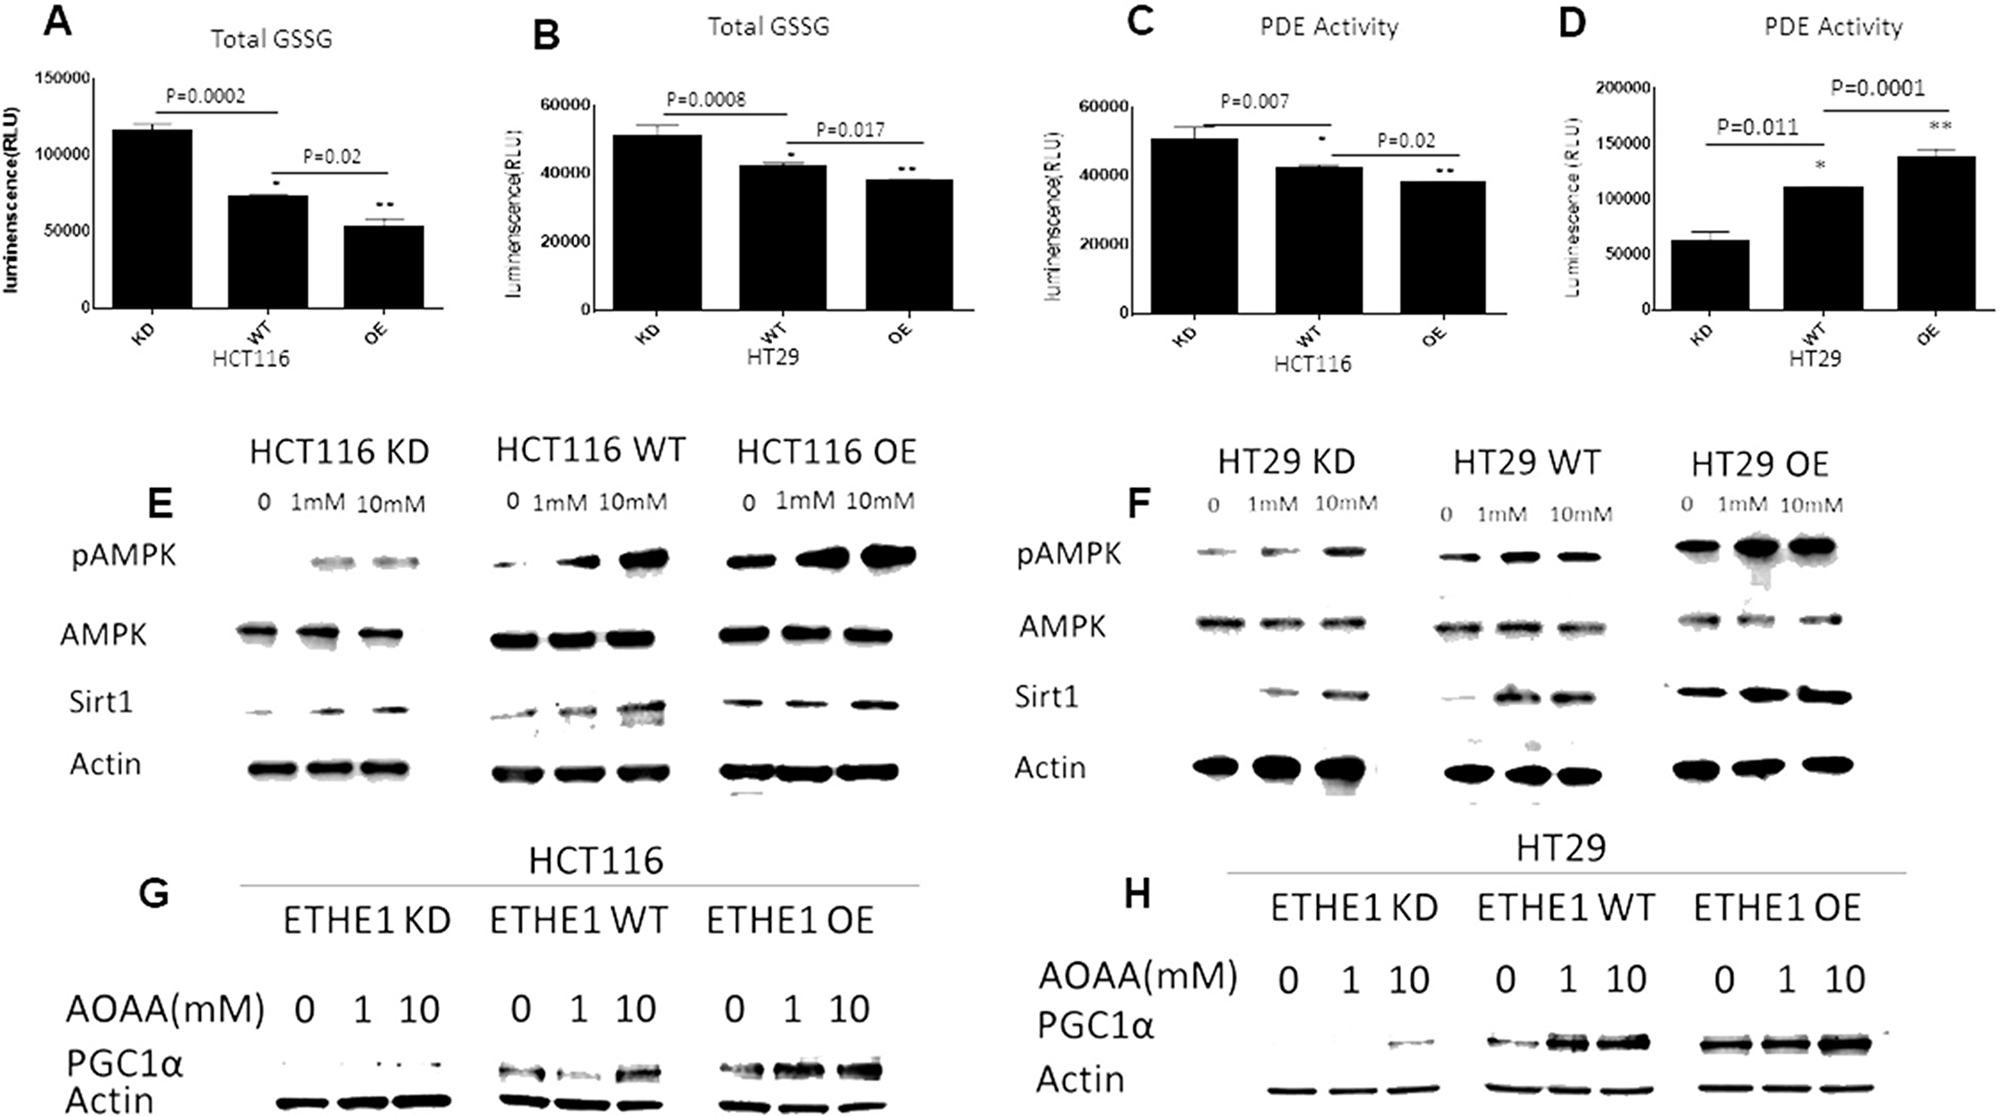 ETHE1 levels drive PDE mediated stimulation of pAMPK/Sirt1.